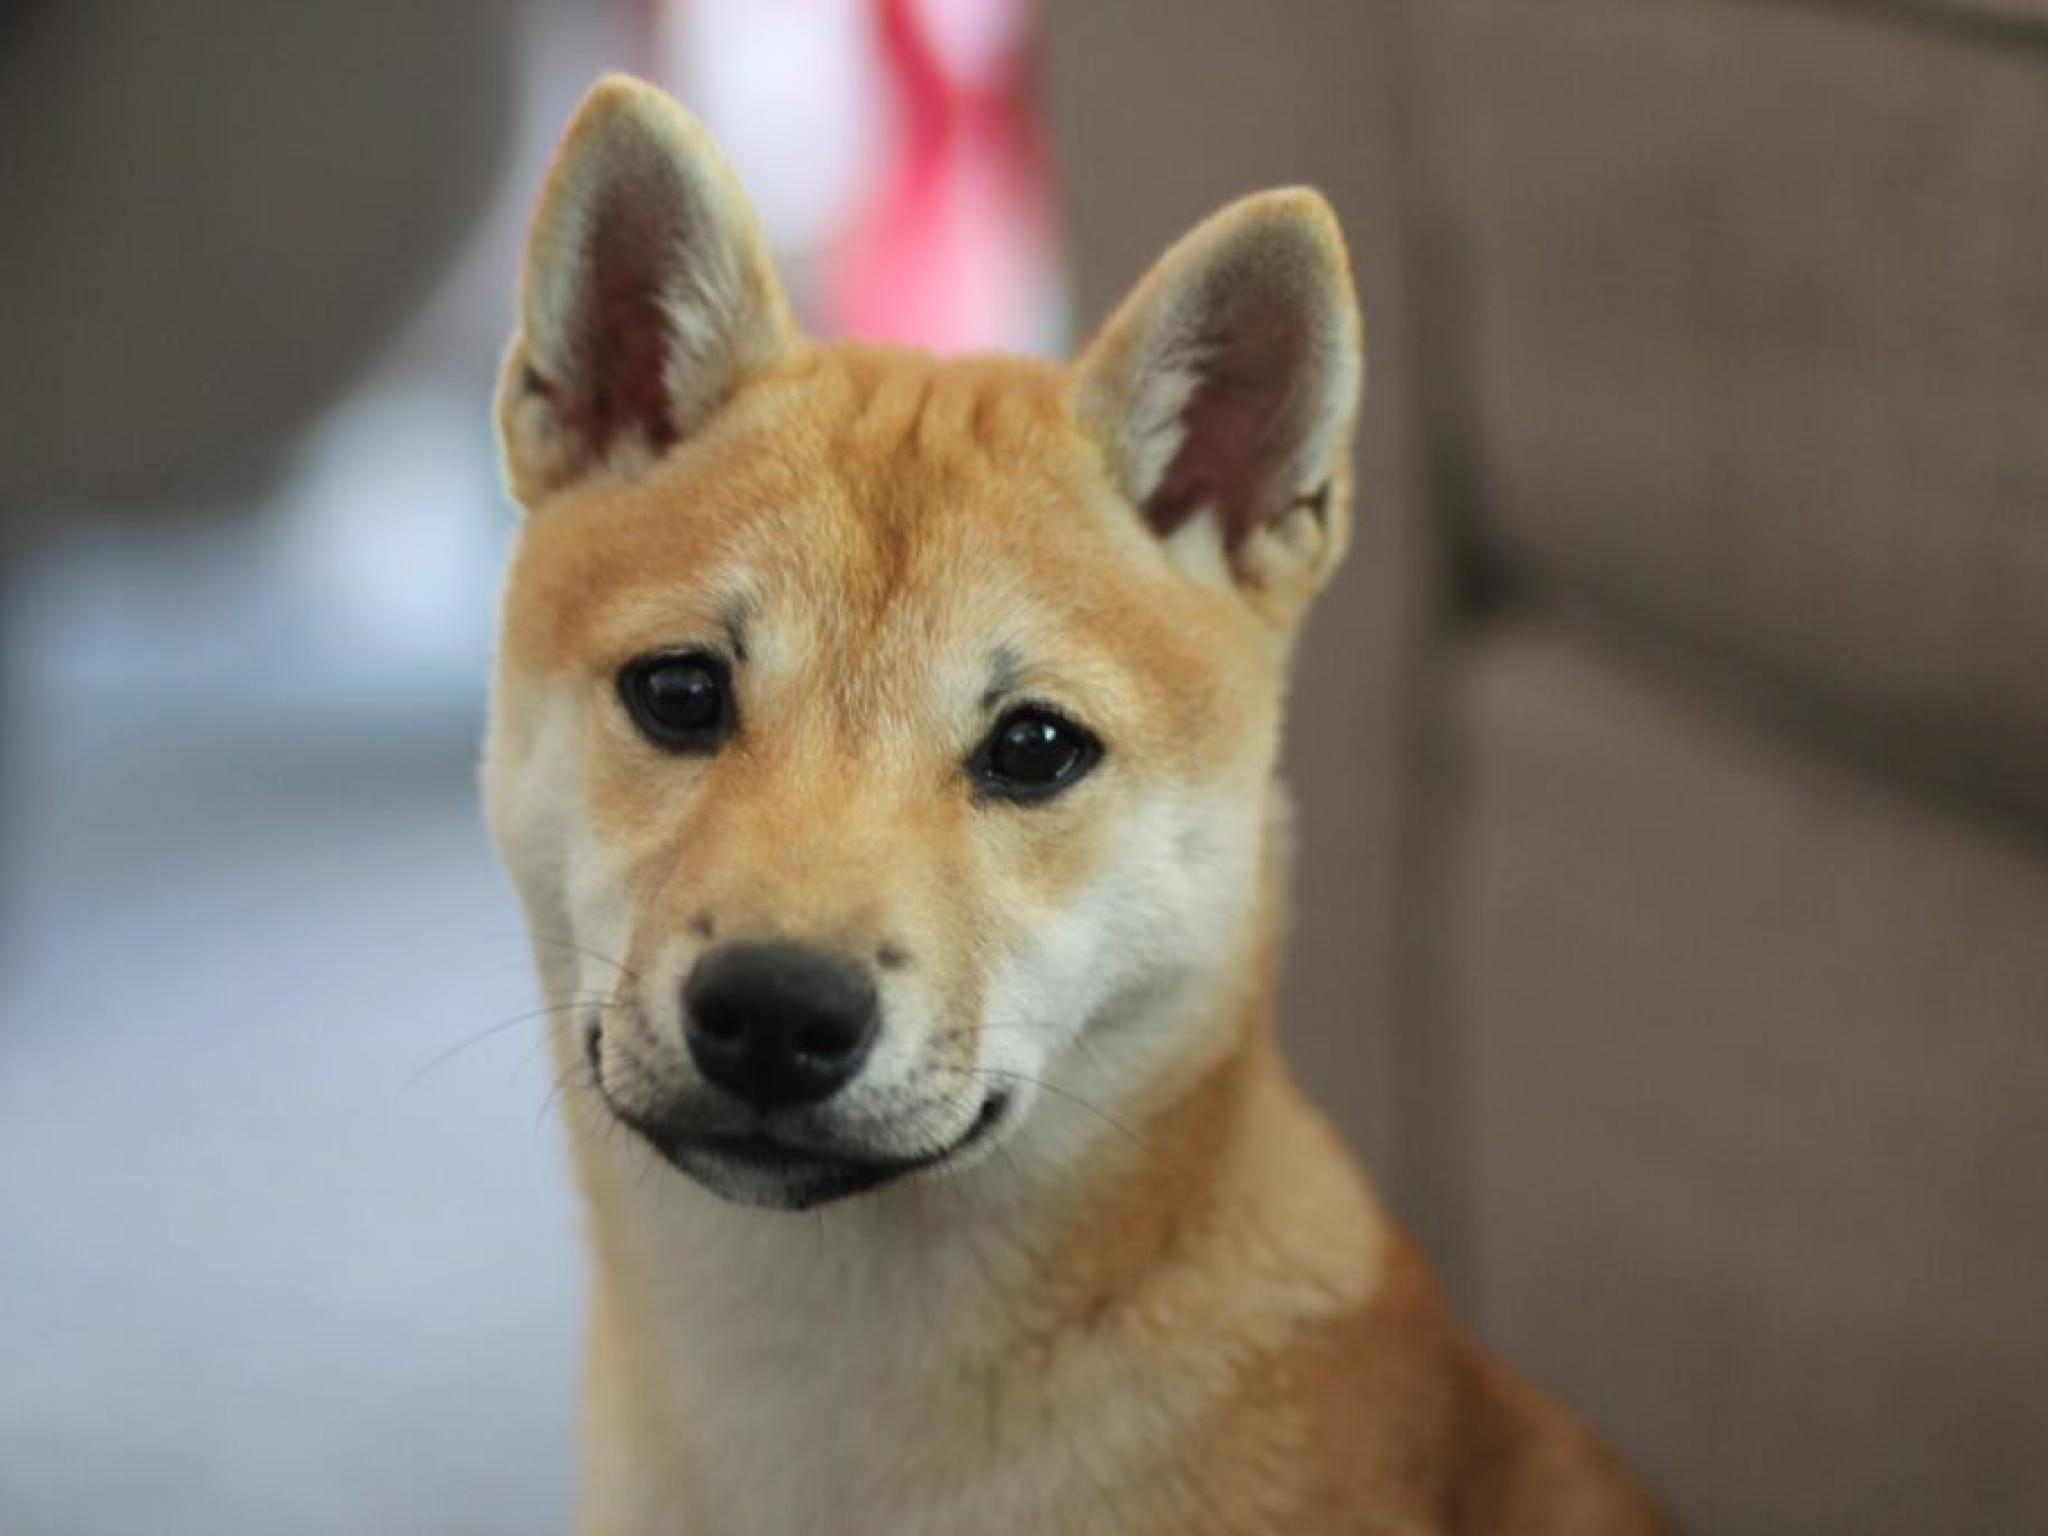  whats-going-on-with-dogecoin-doge 